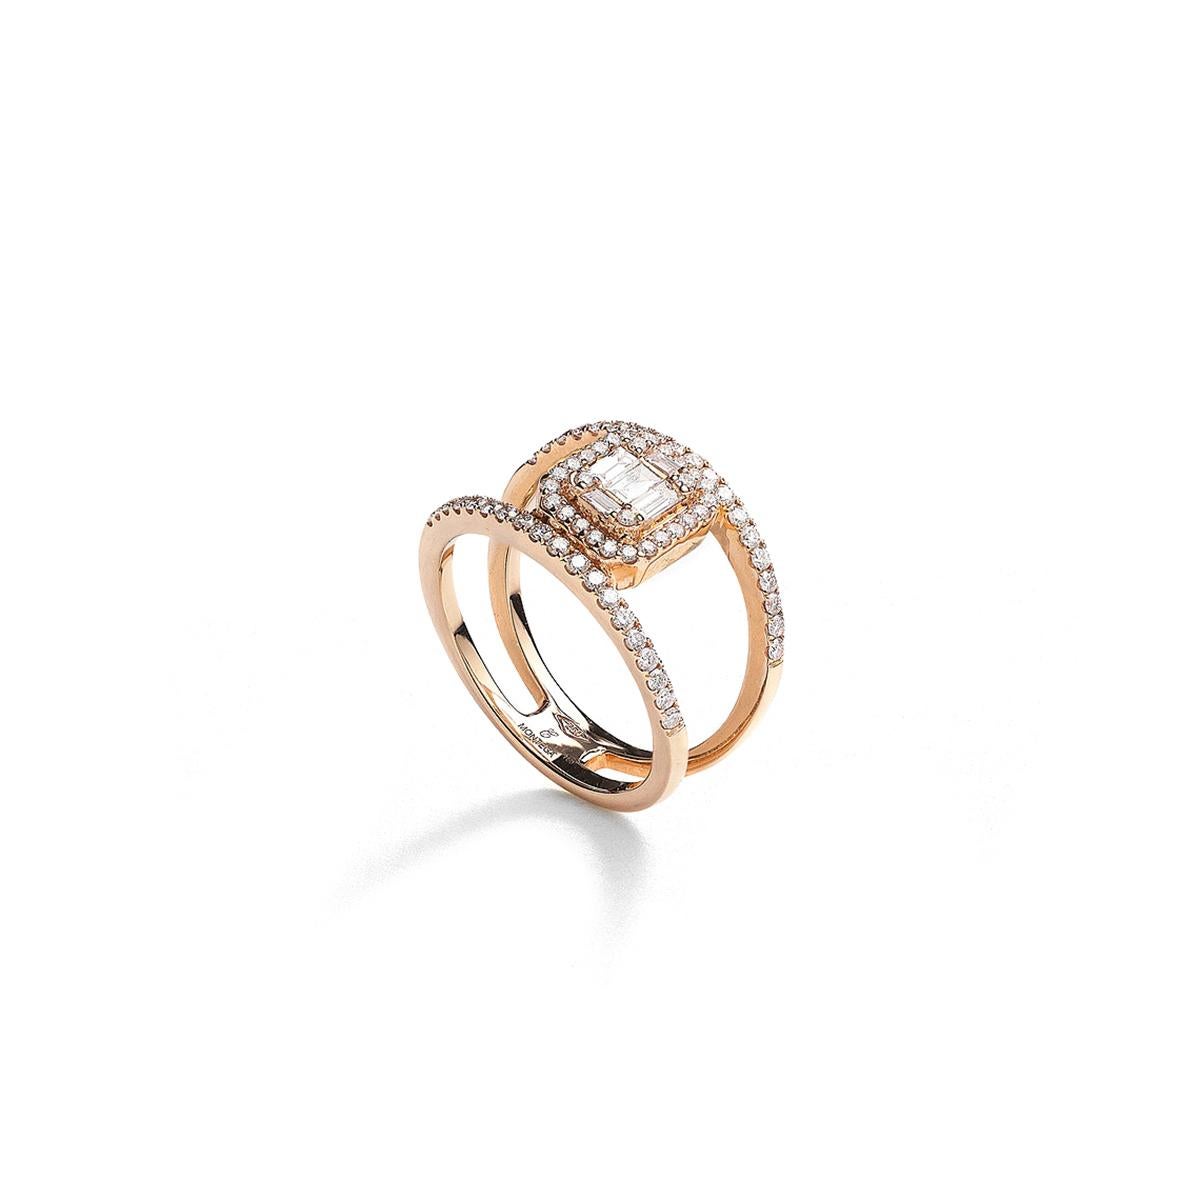 Ring in 18kt pink gold set with 5 baguette cut diamonds 0.20 cts and 66 diamonds 0.51 cts Size 53